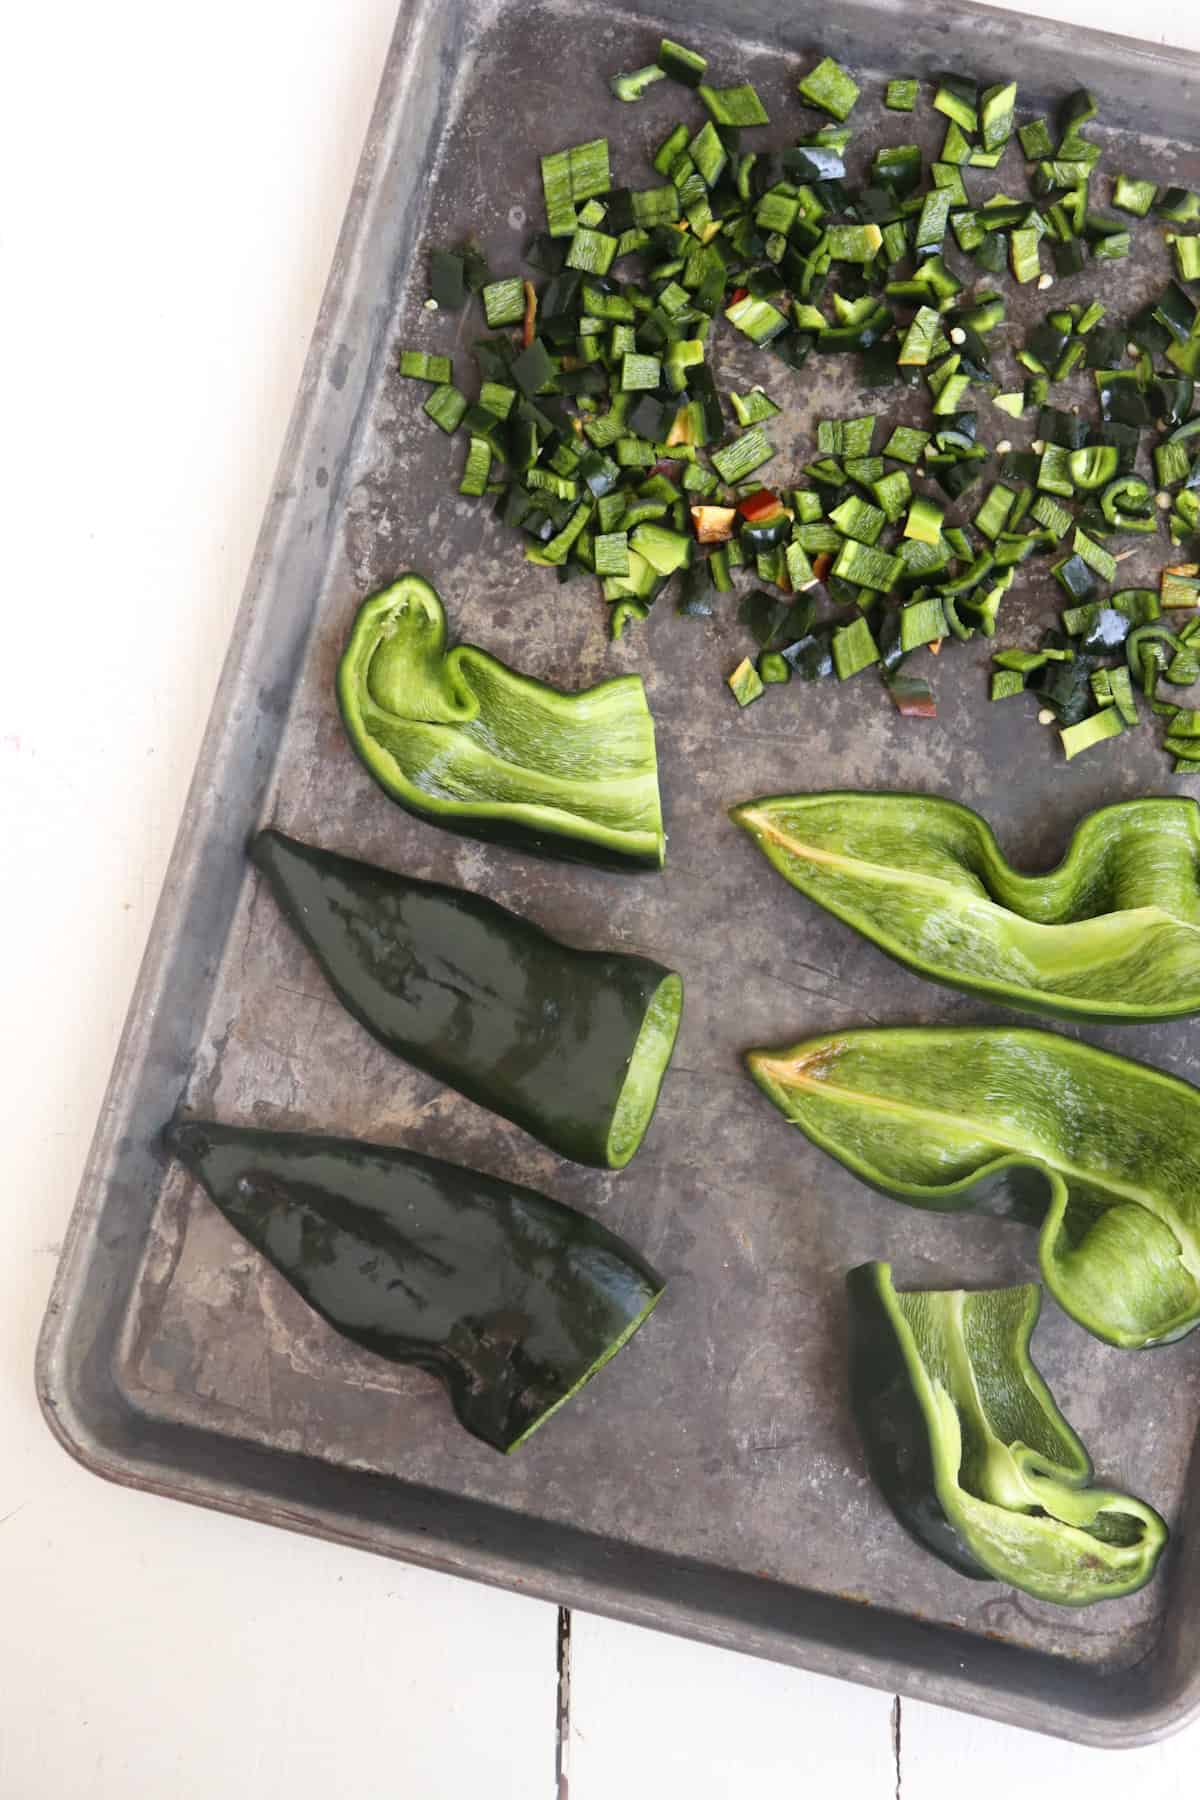 poblanos sliced different ways on baking sheet.